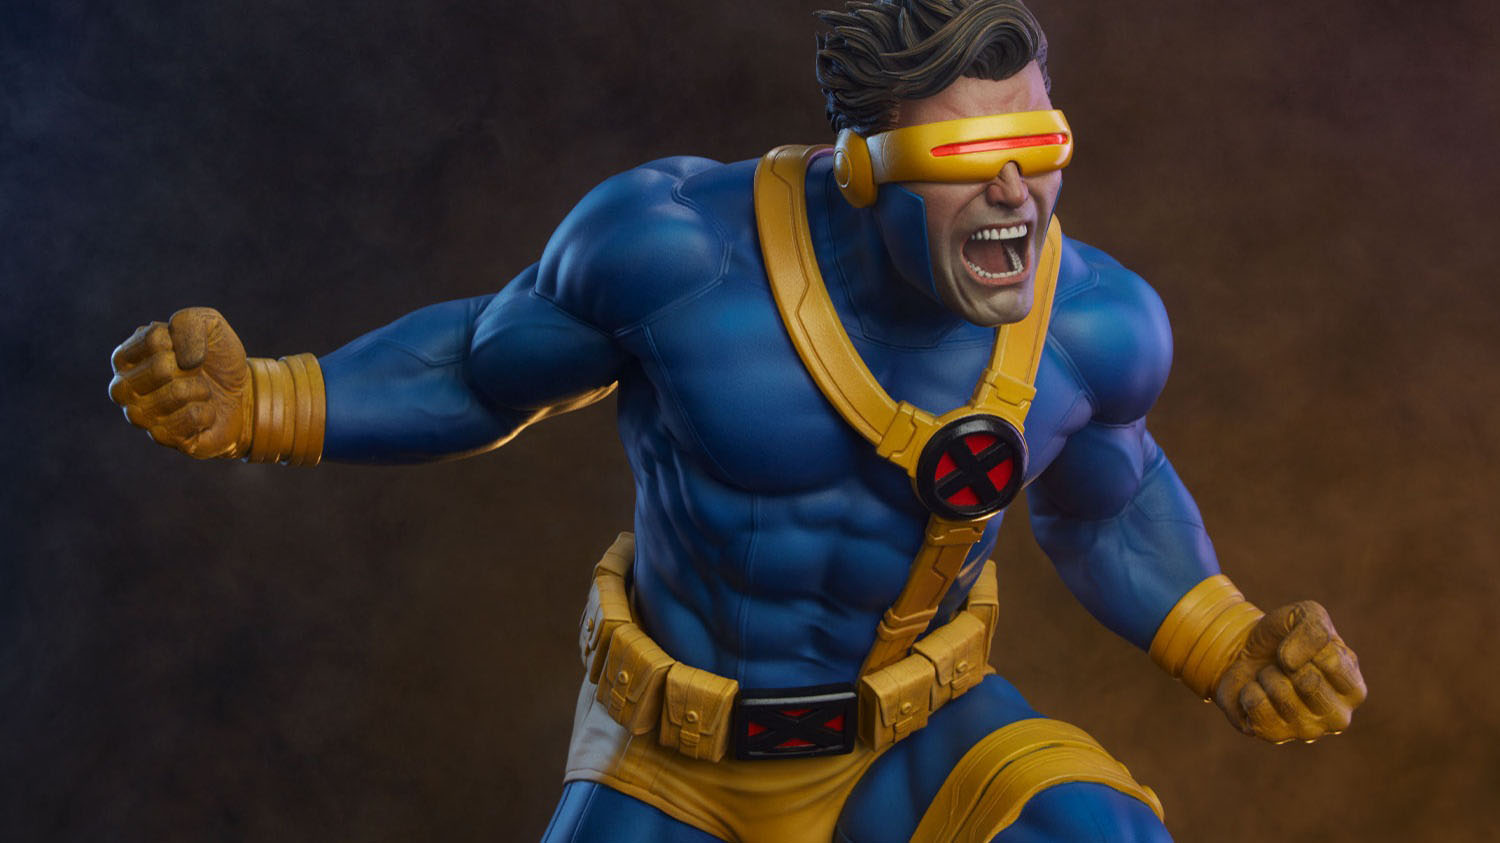 Cyclops (Scott Summers) is a fictional character appearing in American comic books published by Marvel Comics and is a foundi...